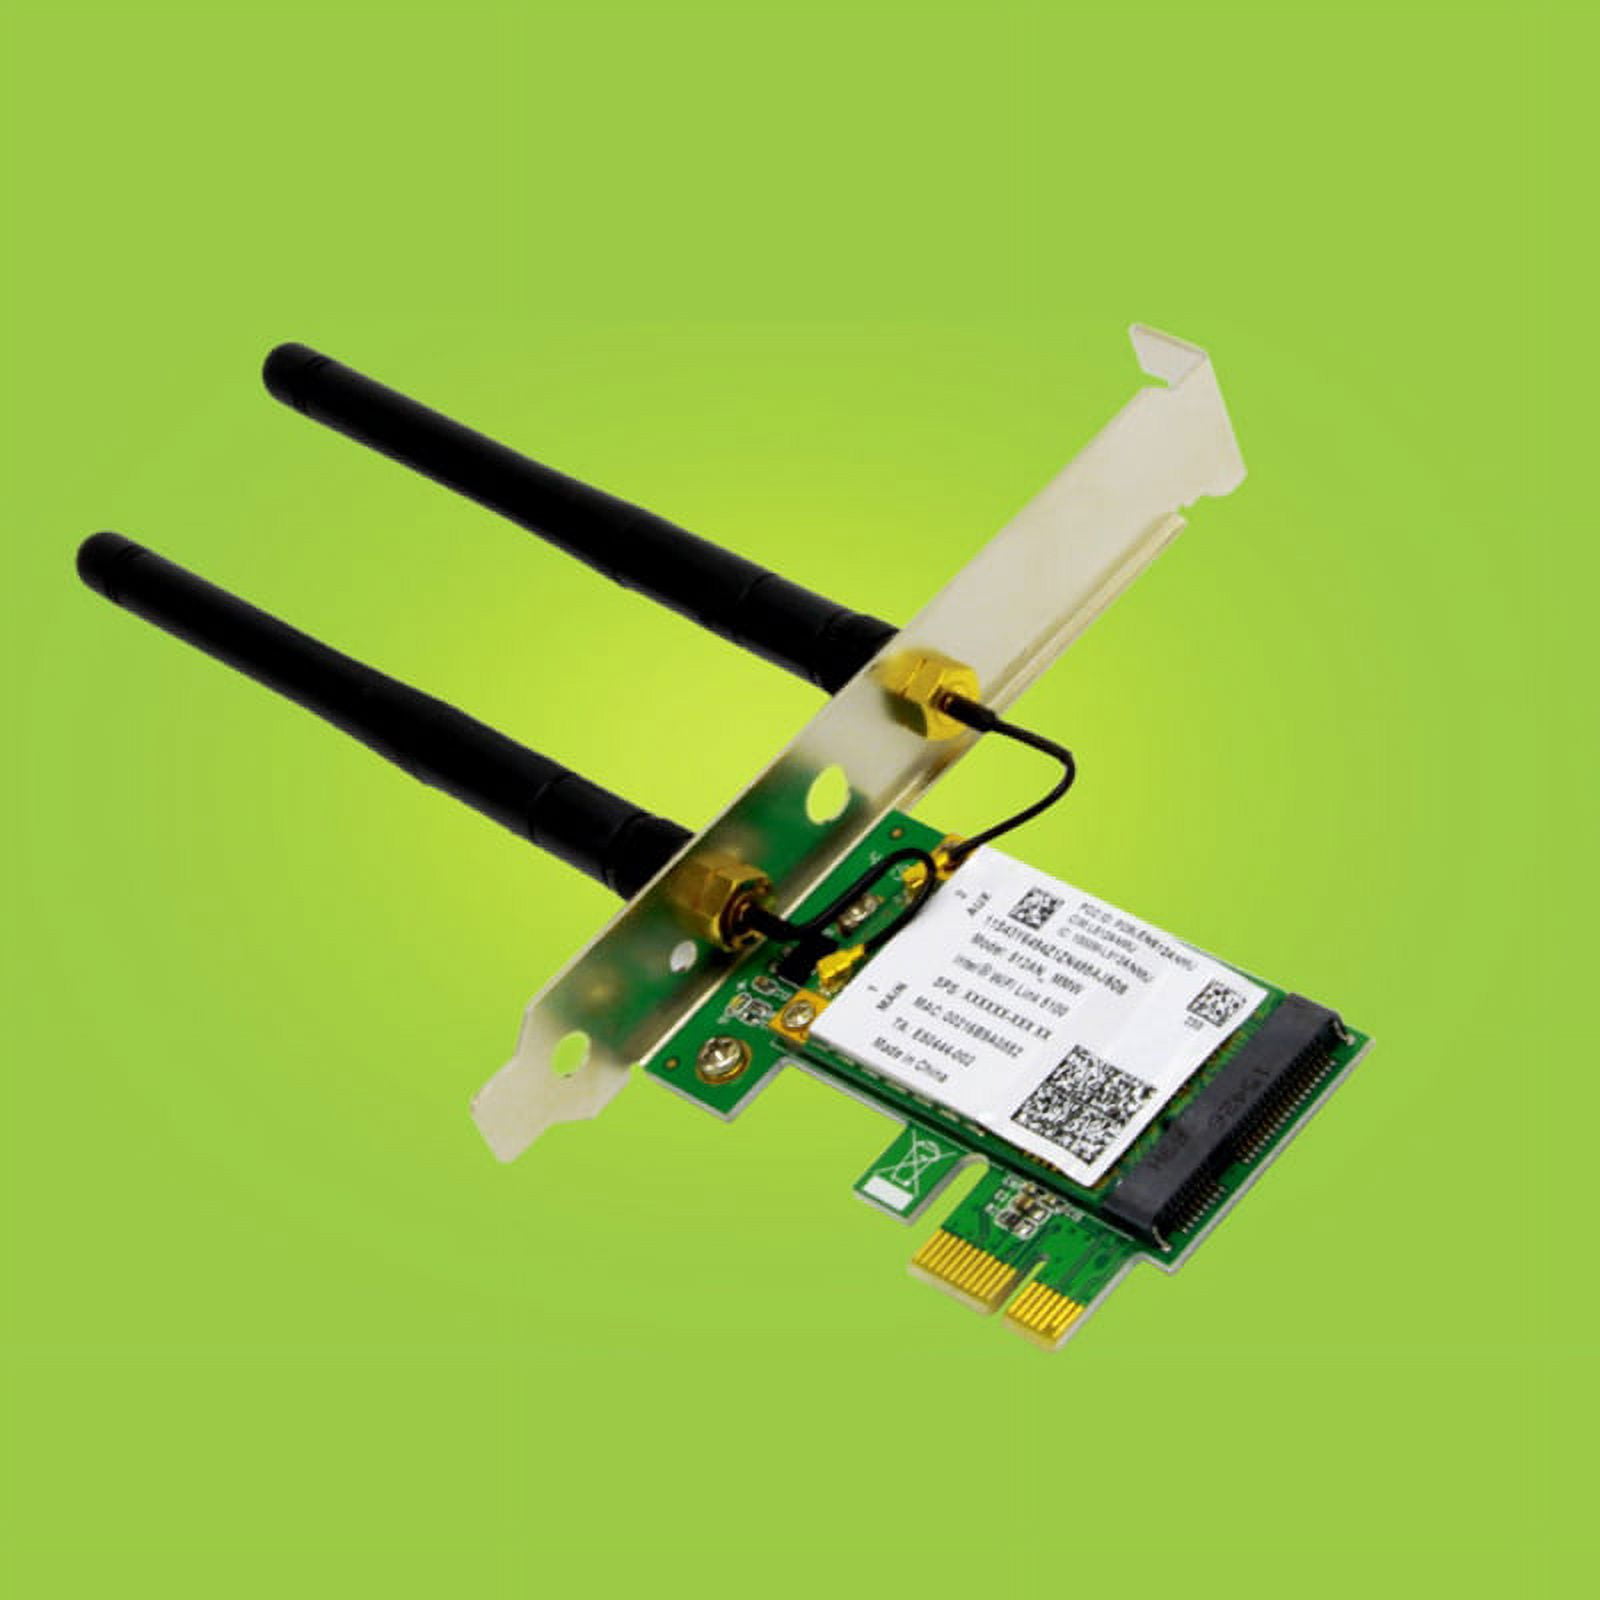 1200Mbps PCIe WiFi Card with bluetoot-h, Dual Band 2.4GHz and 5GHz